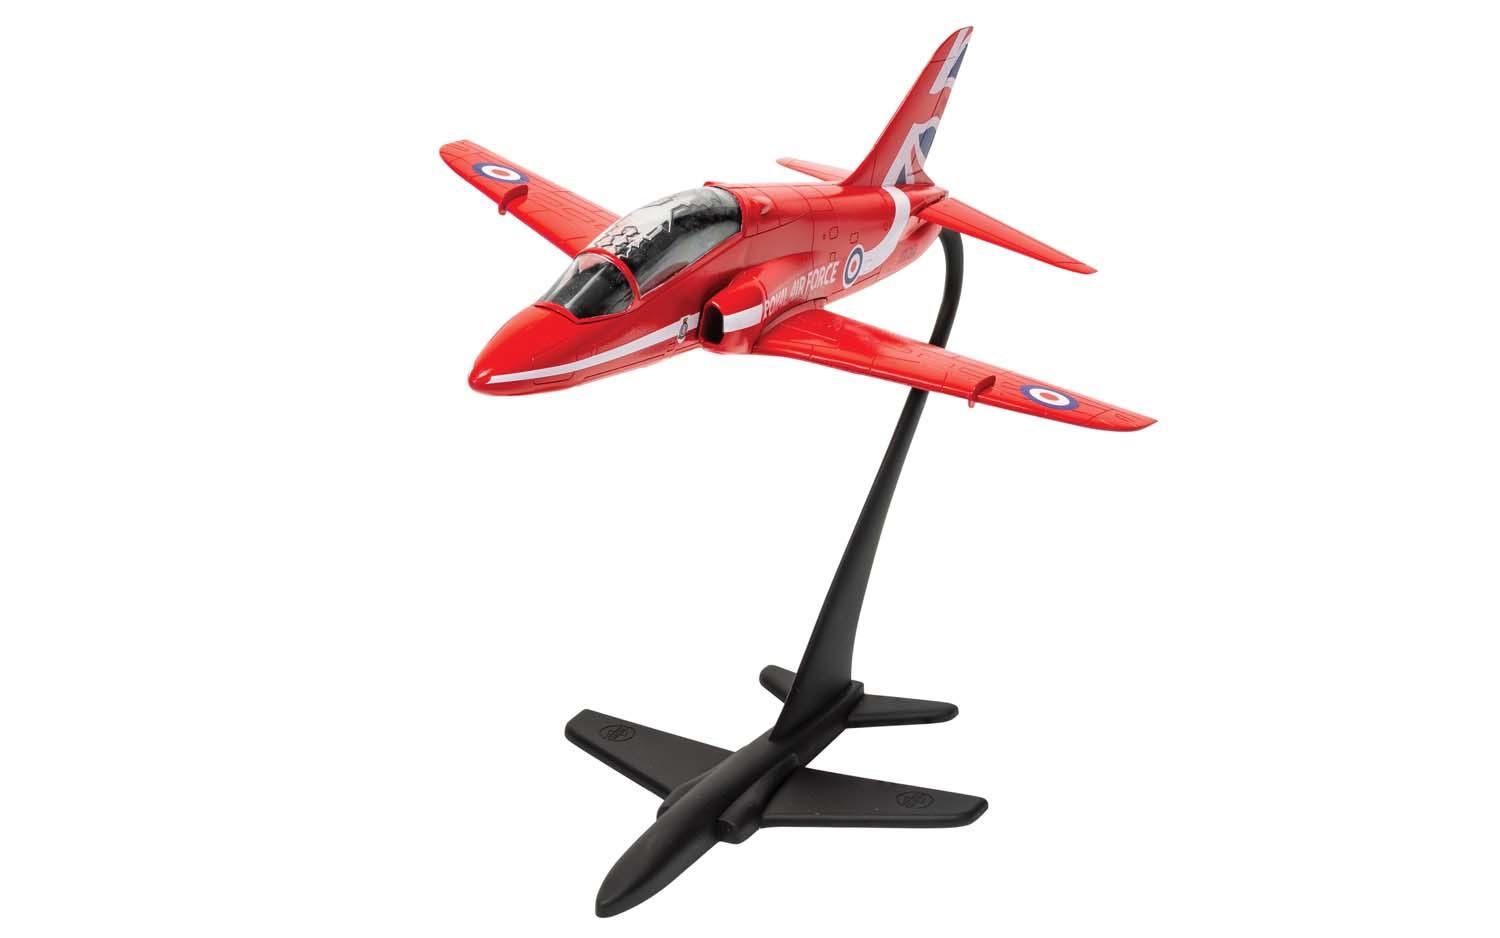 Front view of the Red Arrows model painted in the classic red.